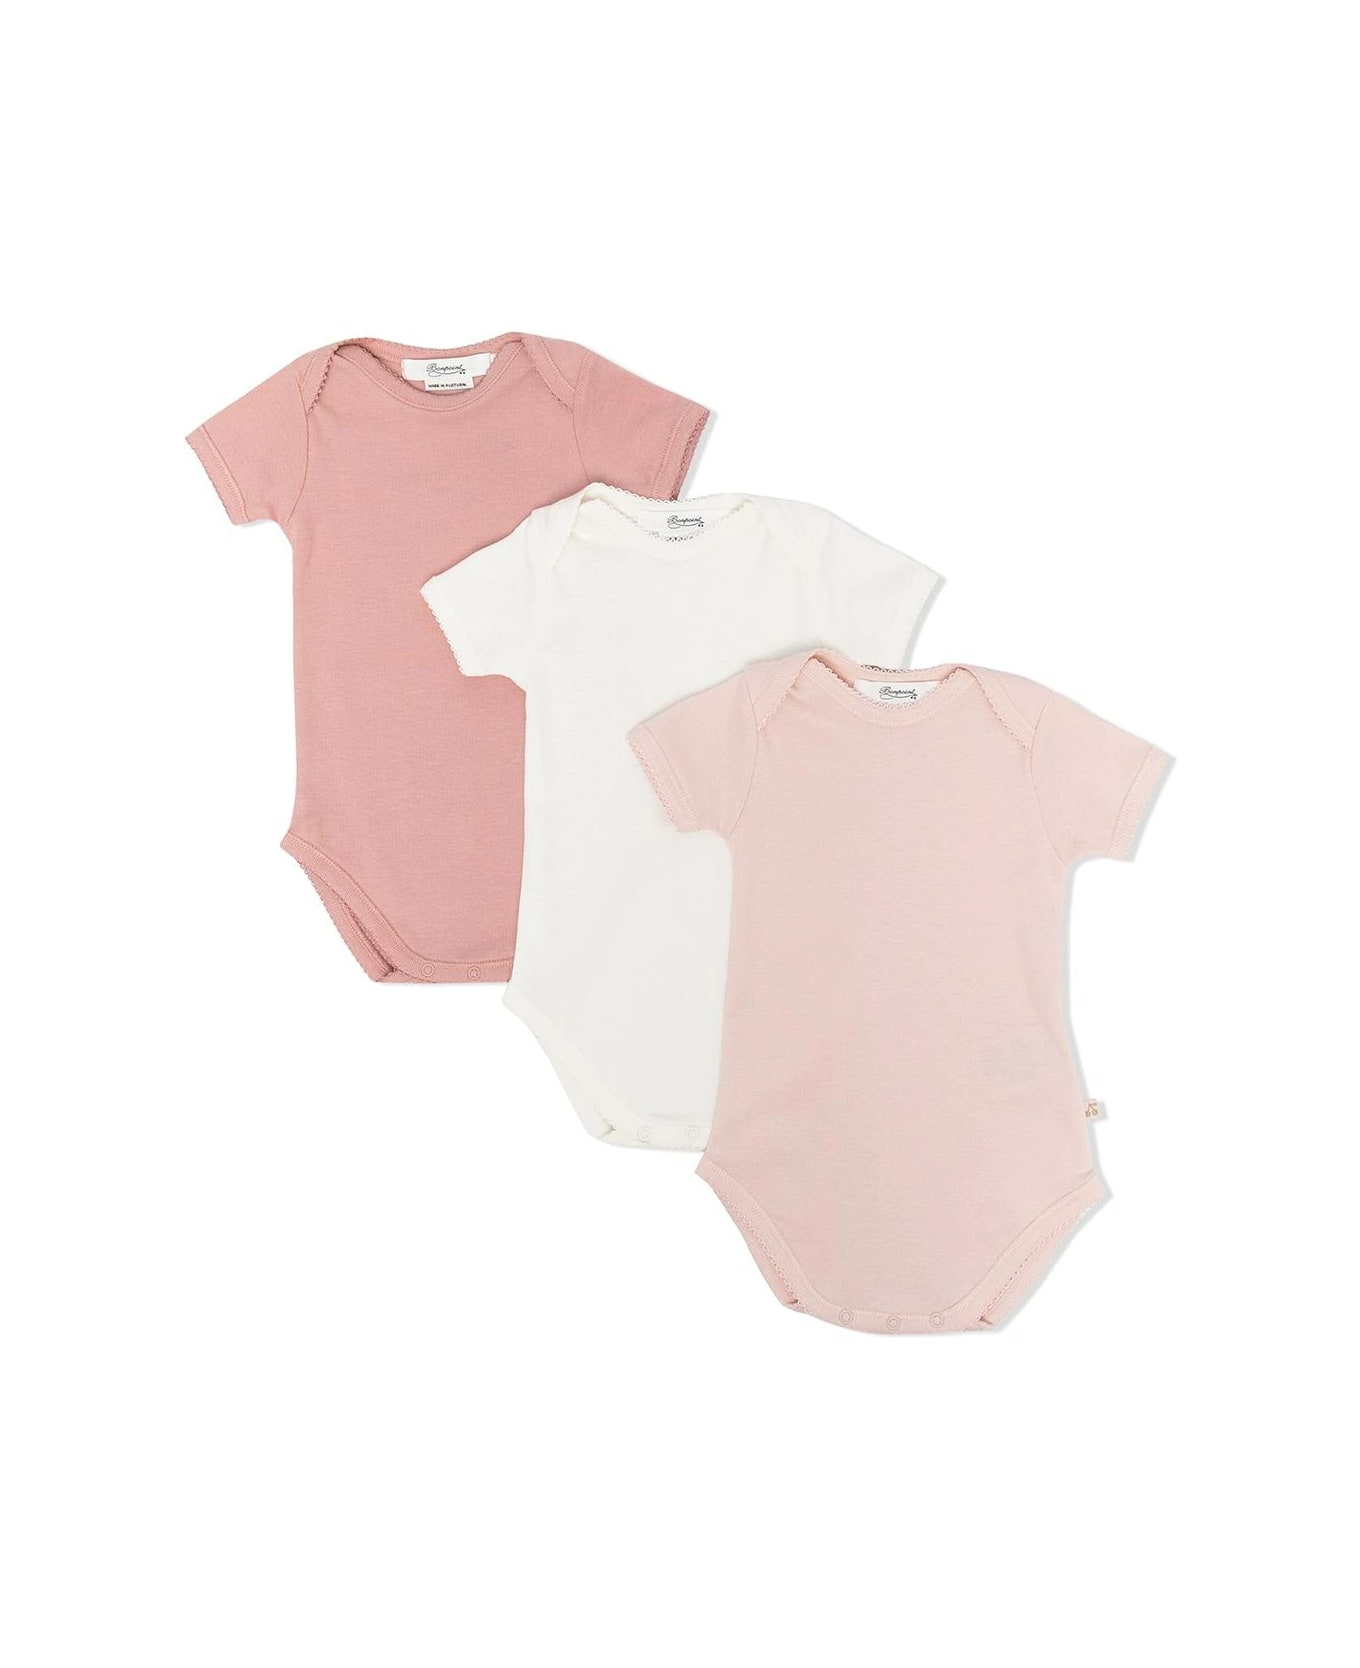 Bonpoint 3 Body Pack In Pink And White Cotton